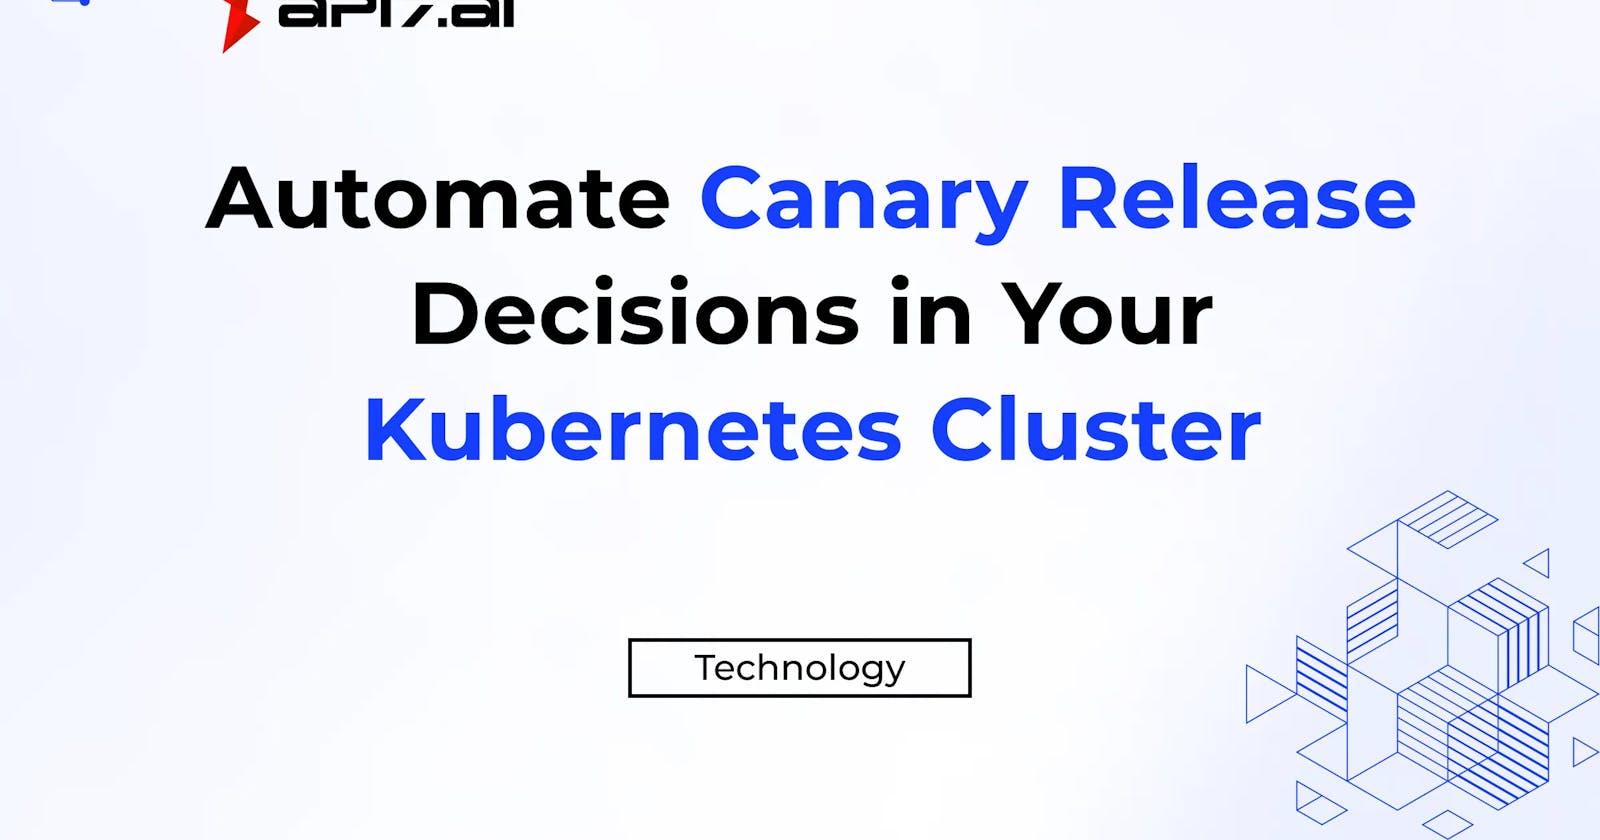 Automate Canary Release Decisions in Your Kubernetes Cluster